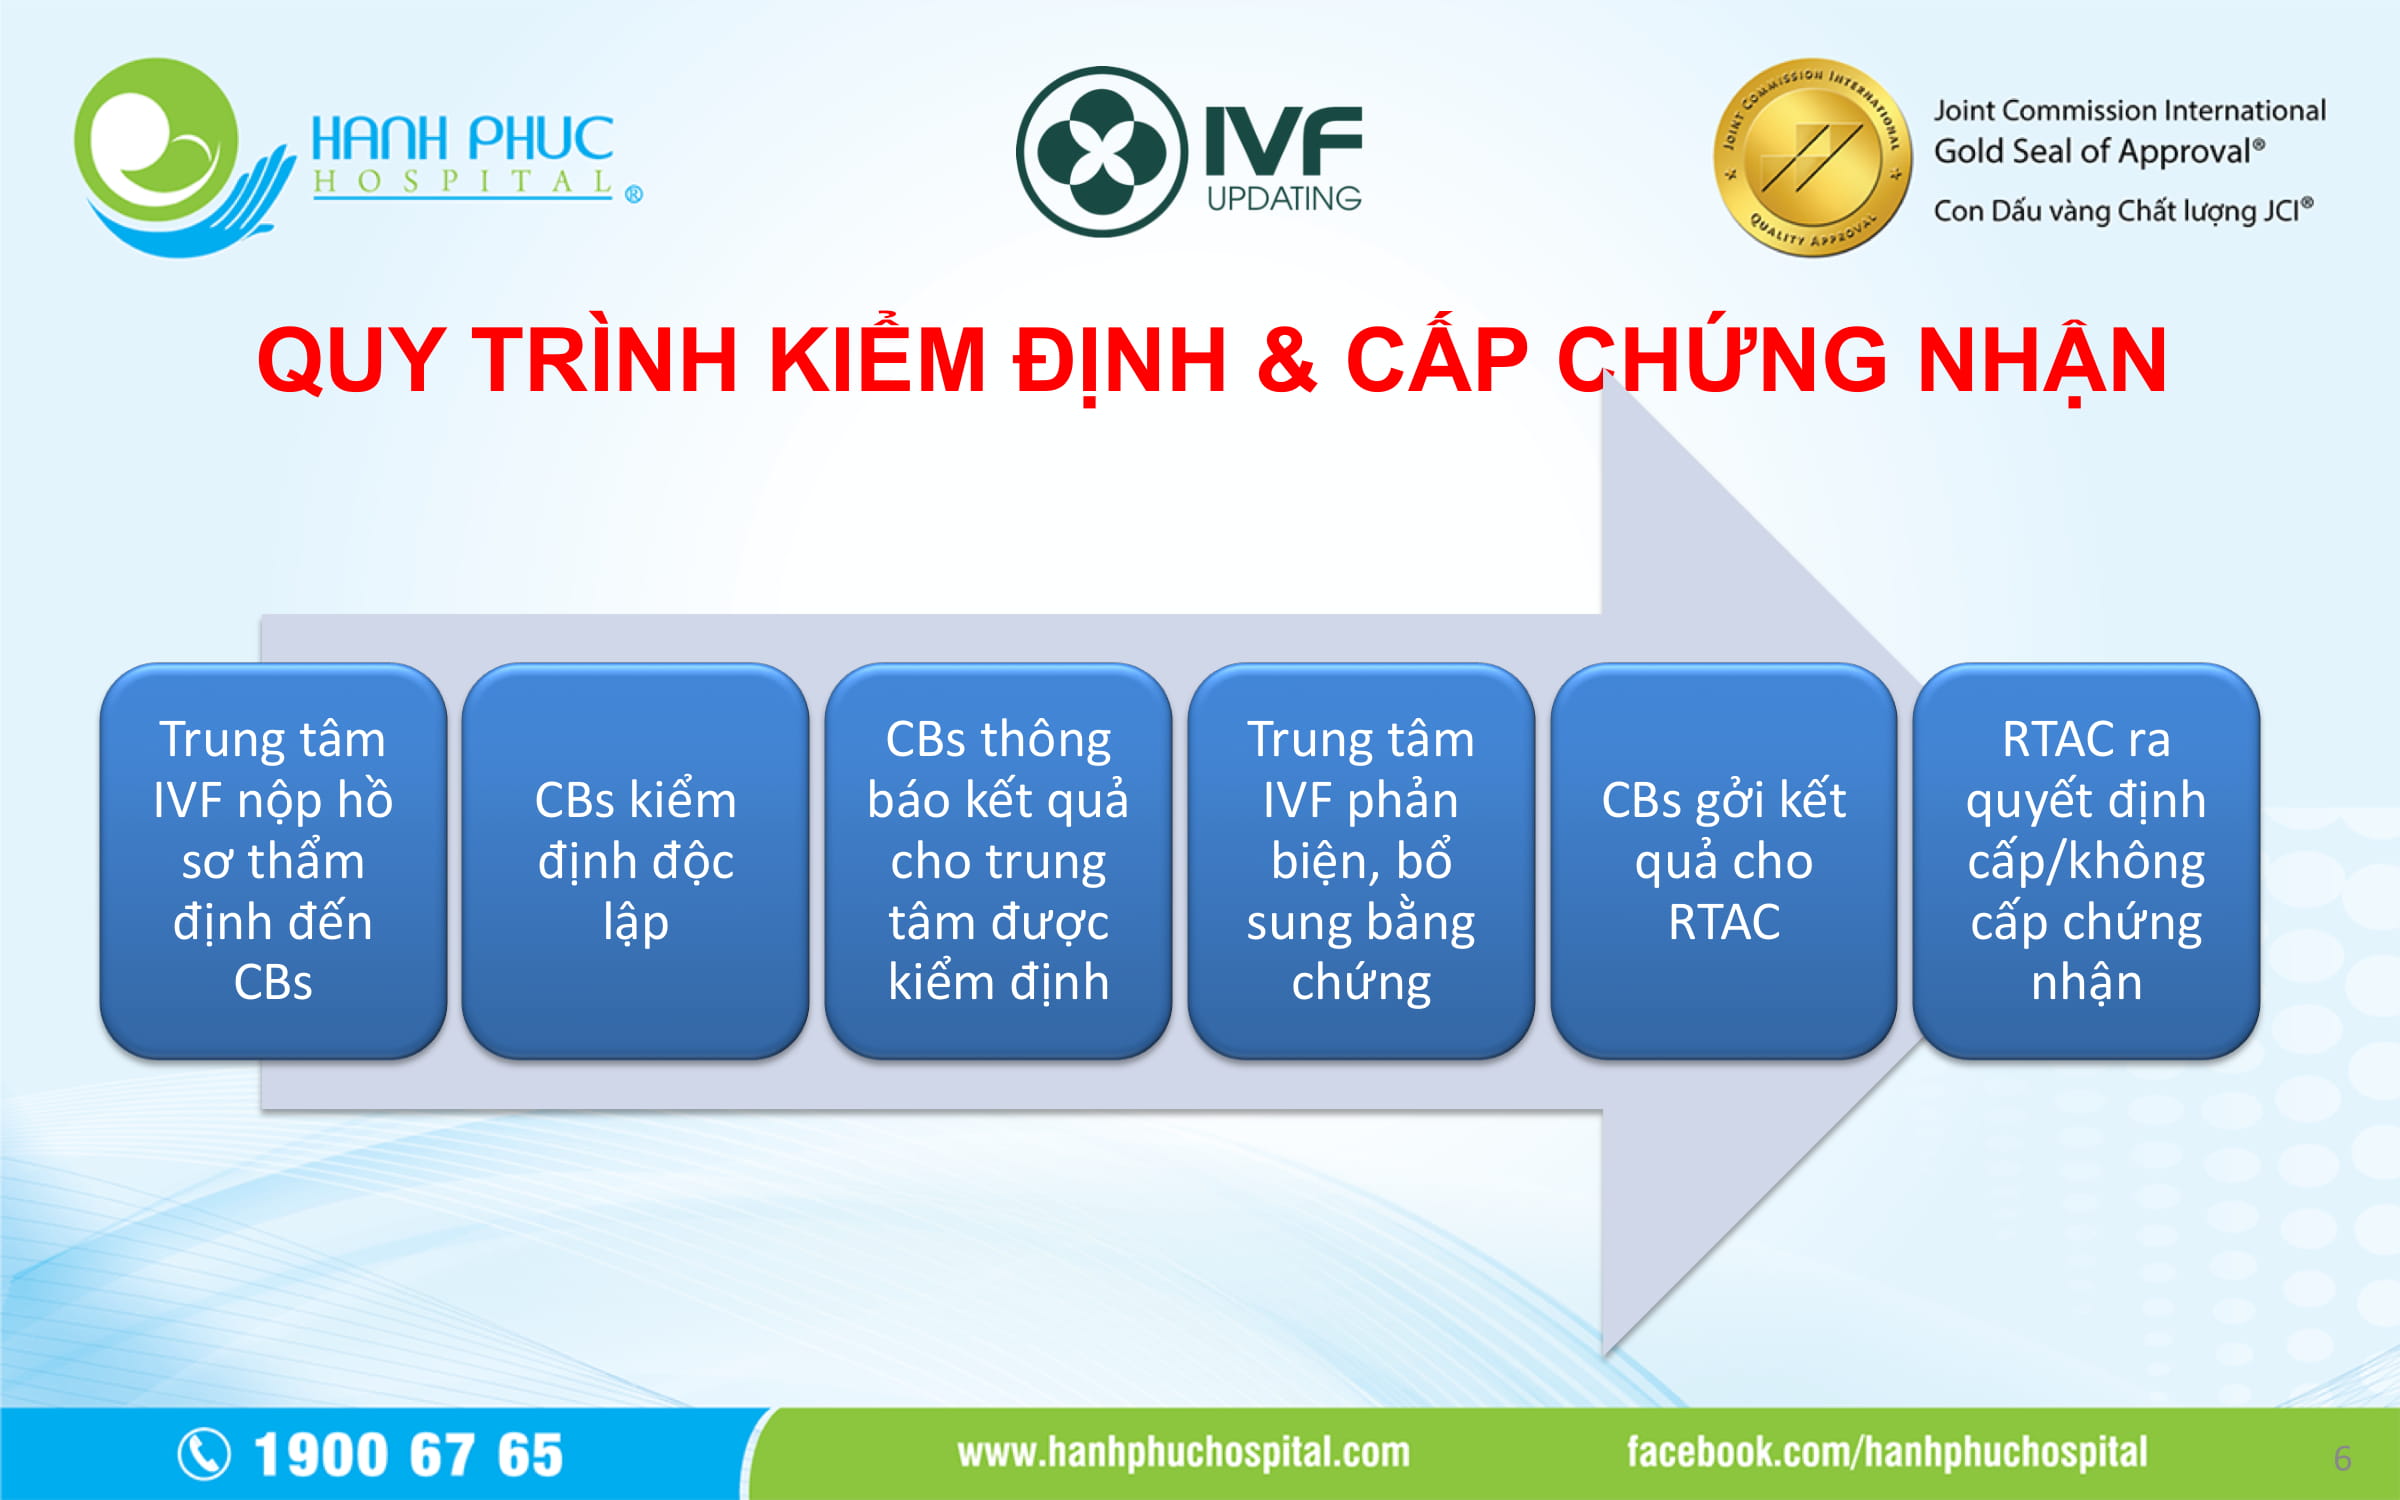 BS Vo Thien An Report_IVF UPDATING 5-06